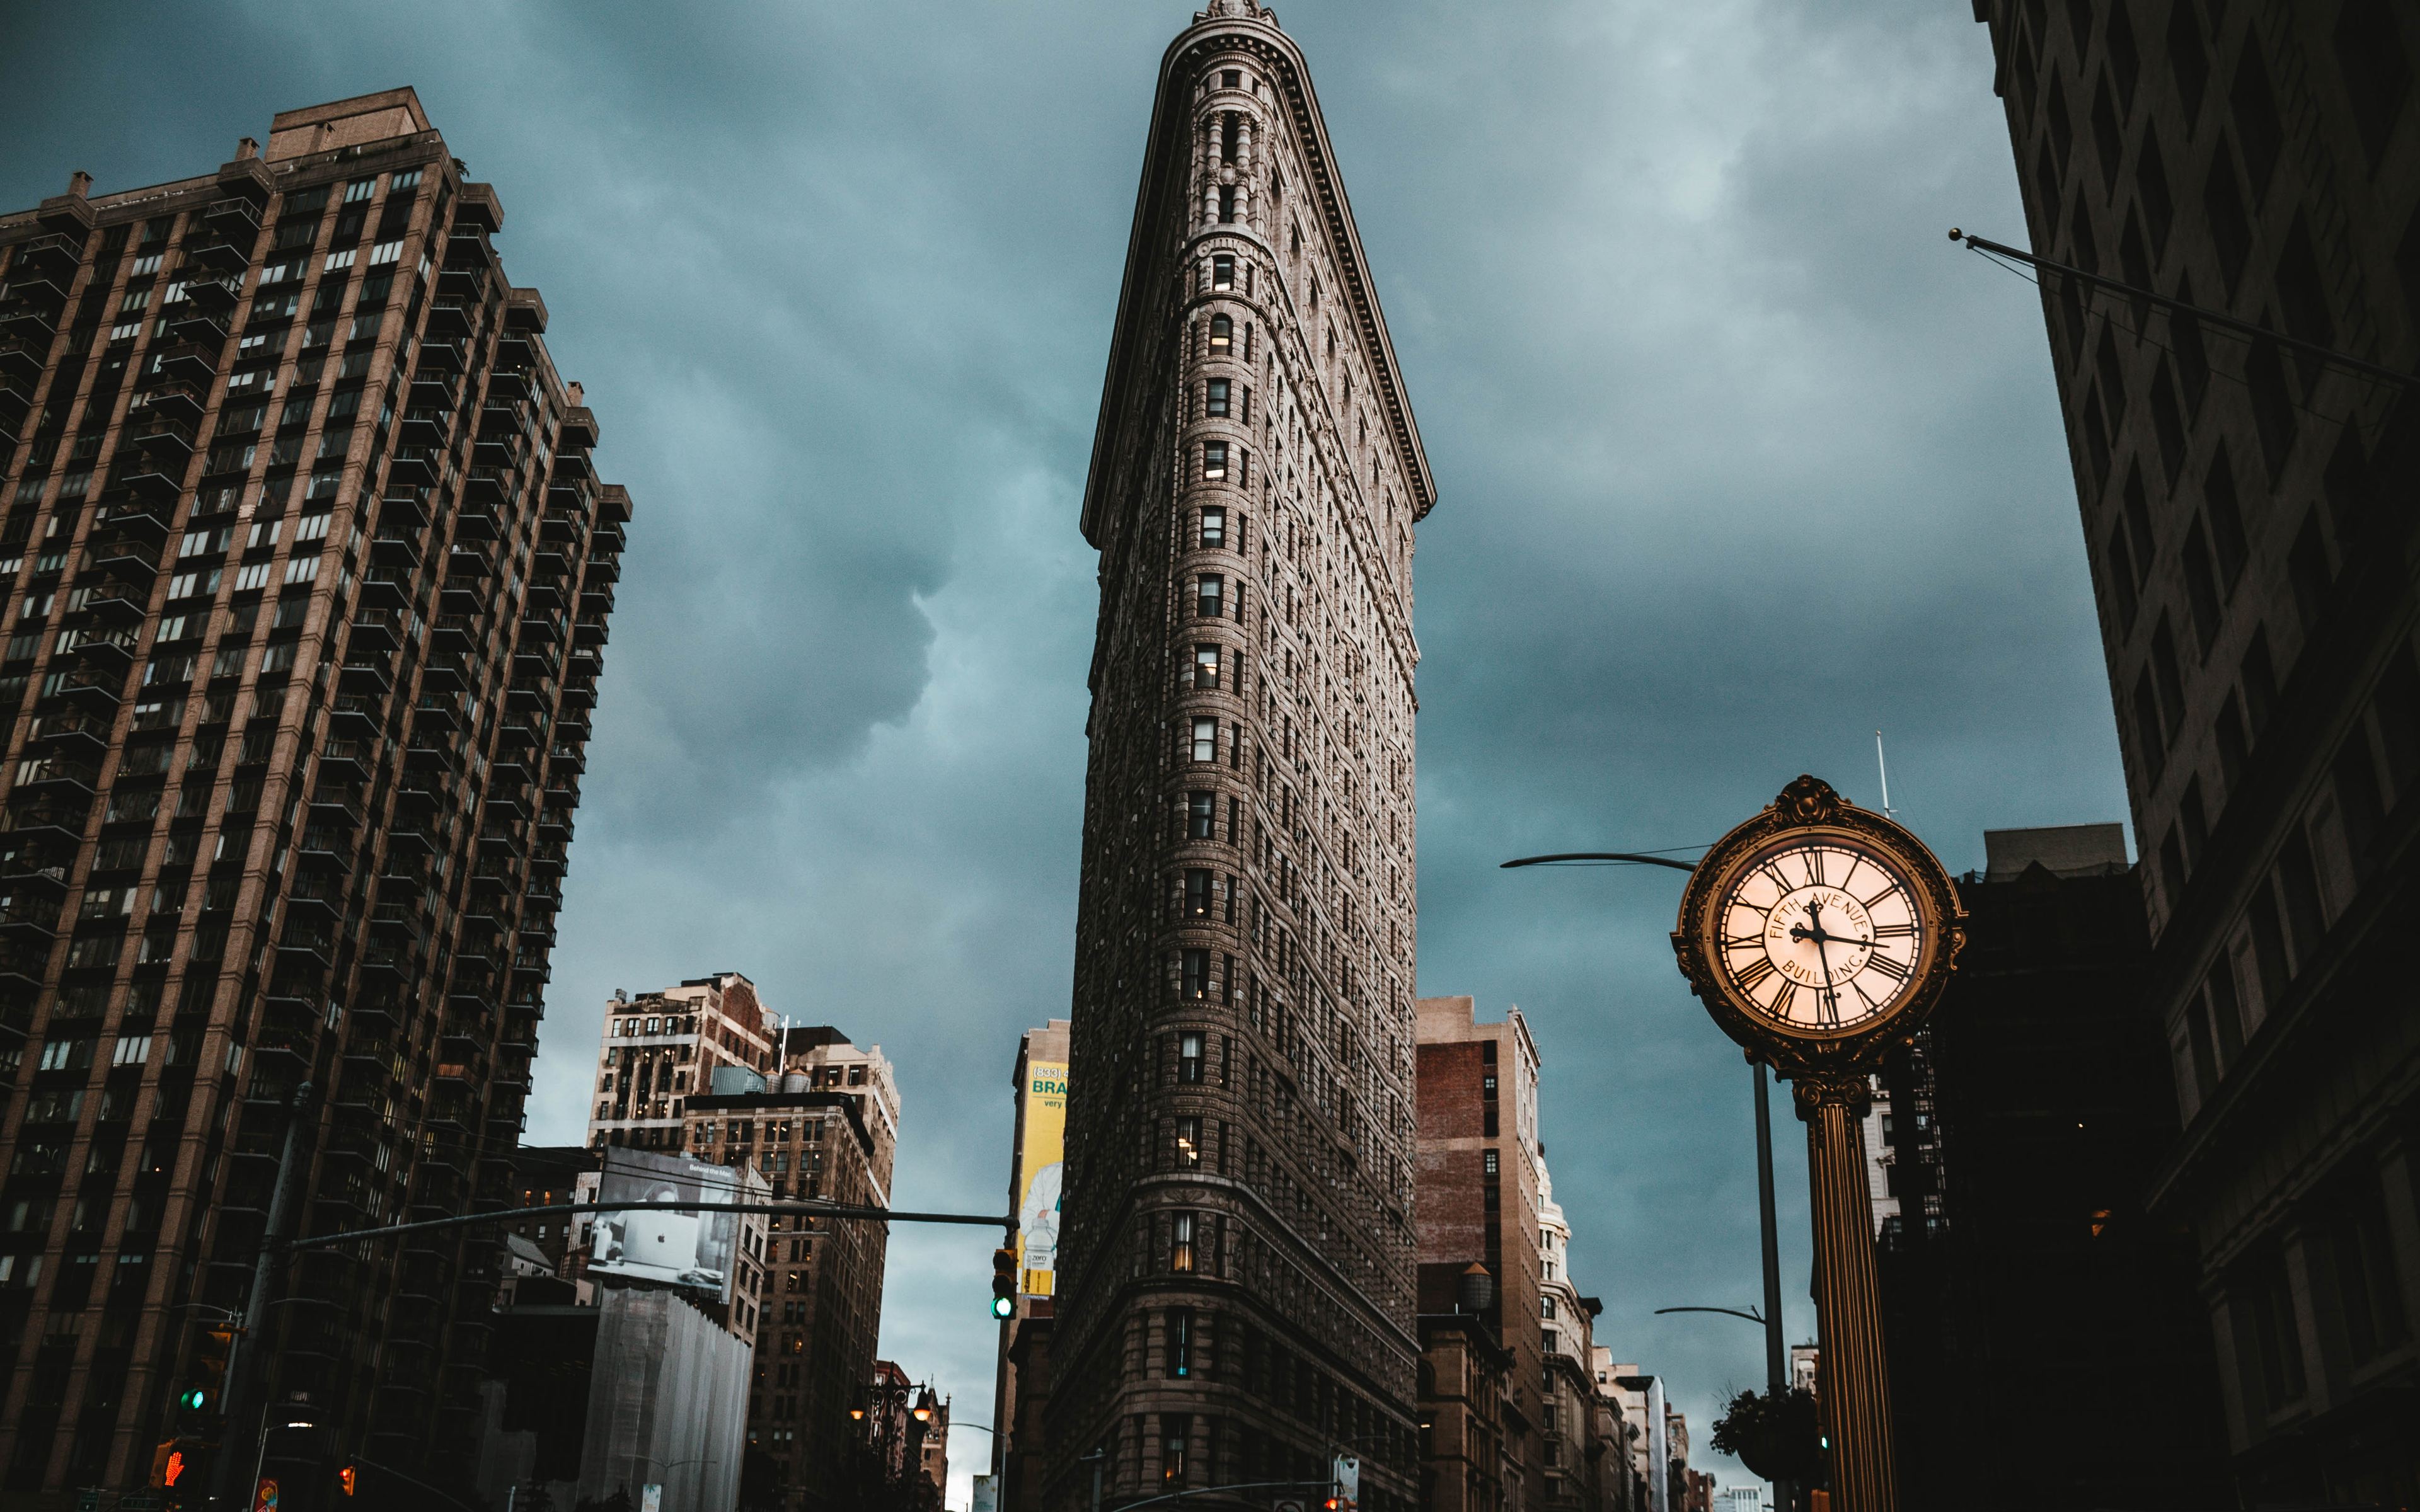 Download wallpaper Fuller Building, 4k, old clock, Flatiron Building, New York City, USA, America, NYC, Manhattan, New York for desktop with resolution 3840x2400. High Quality HD picture wallpaper